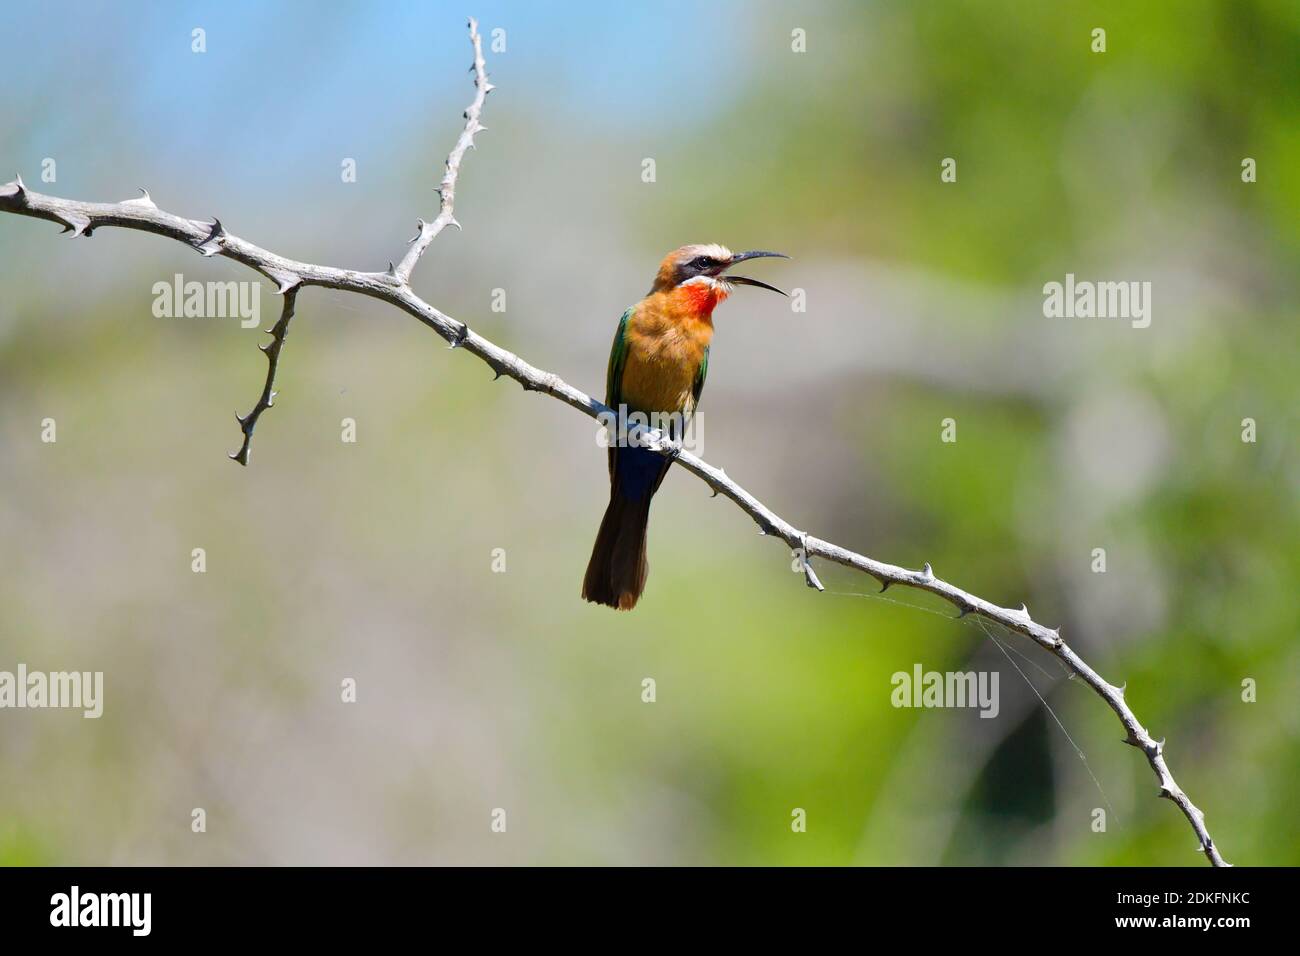 White-fronted Bee-eater (Merops bullockoides) perched on thorny branch in uMkhuze Game Reserve, South Africa. Stock Photo